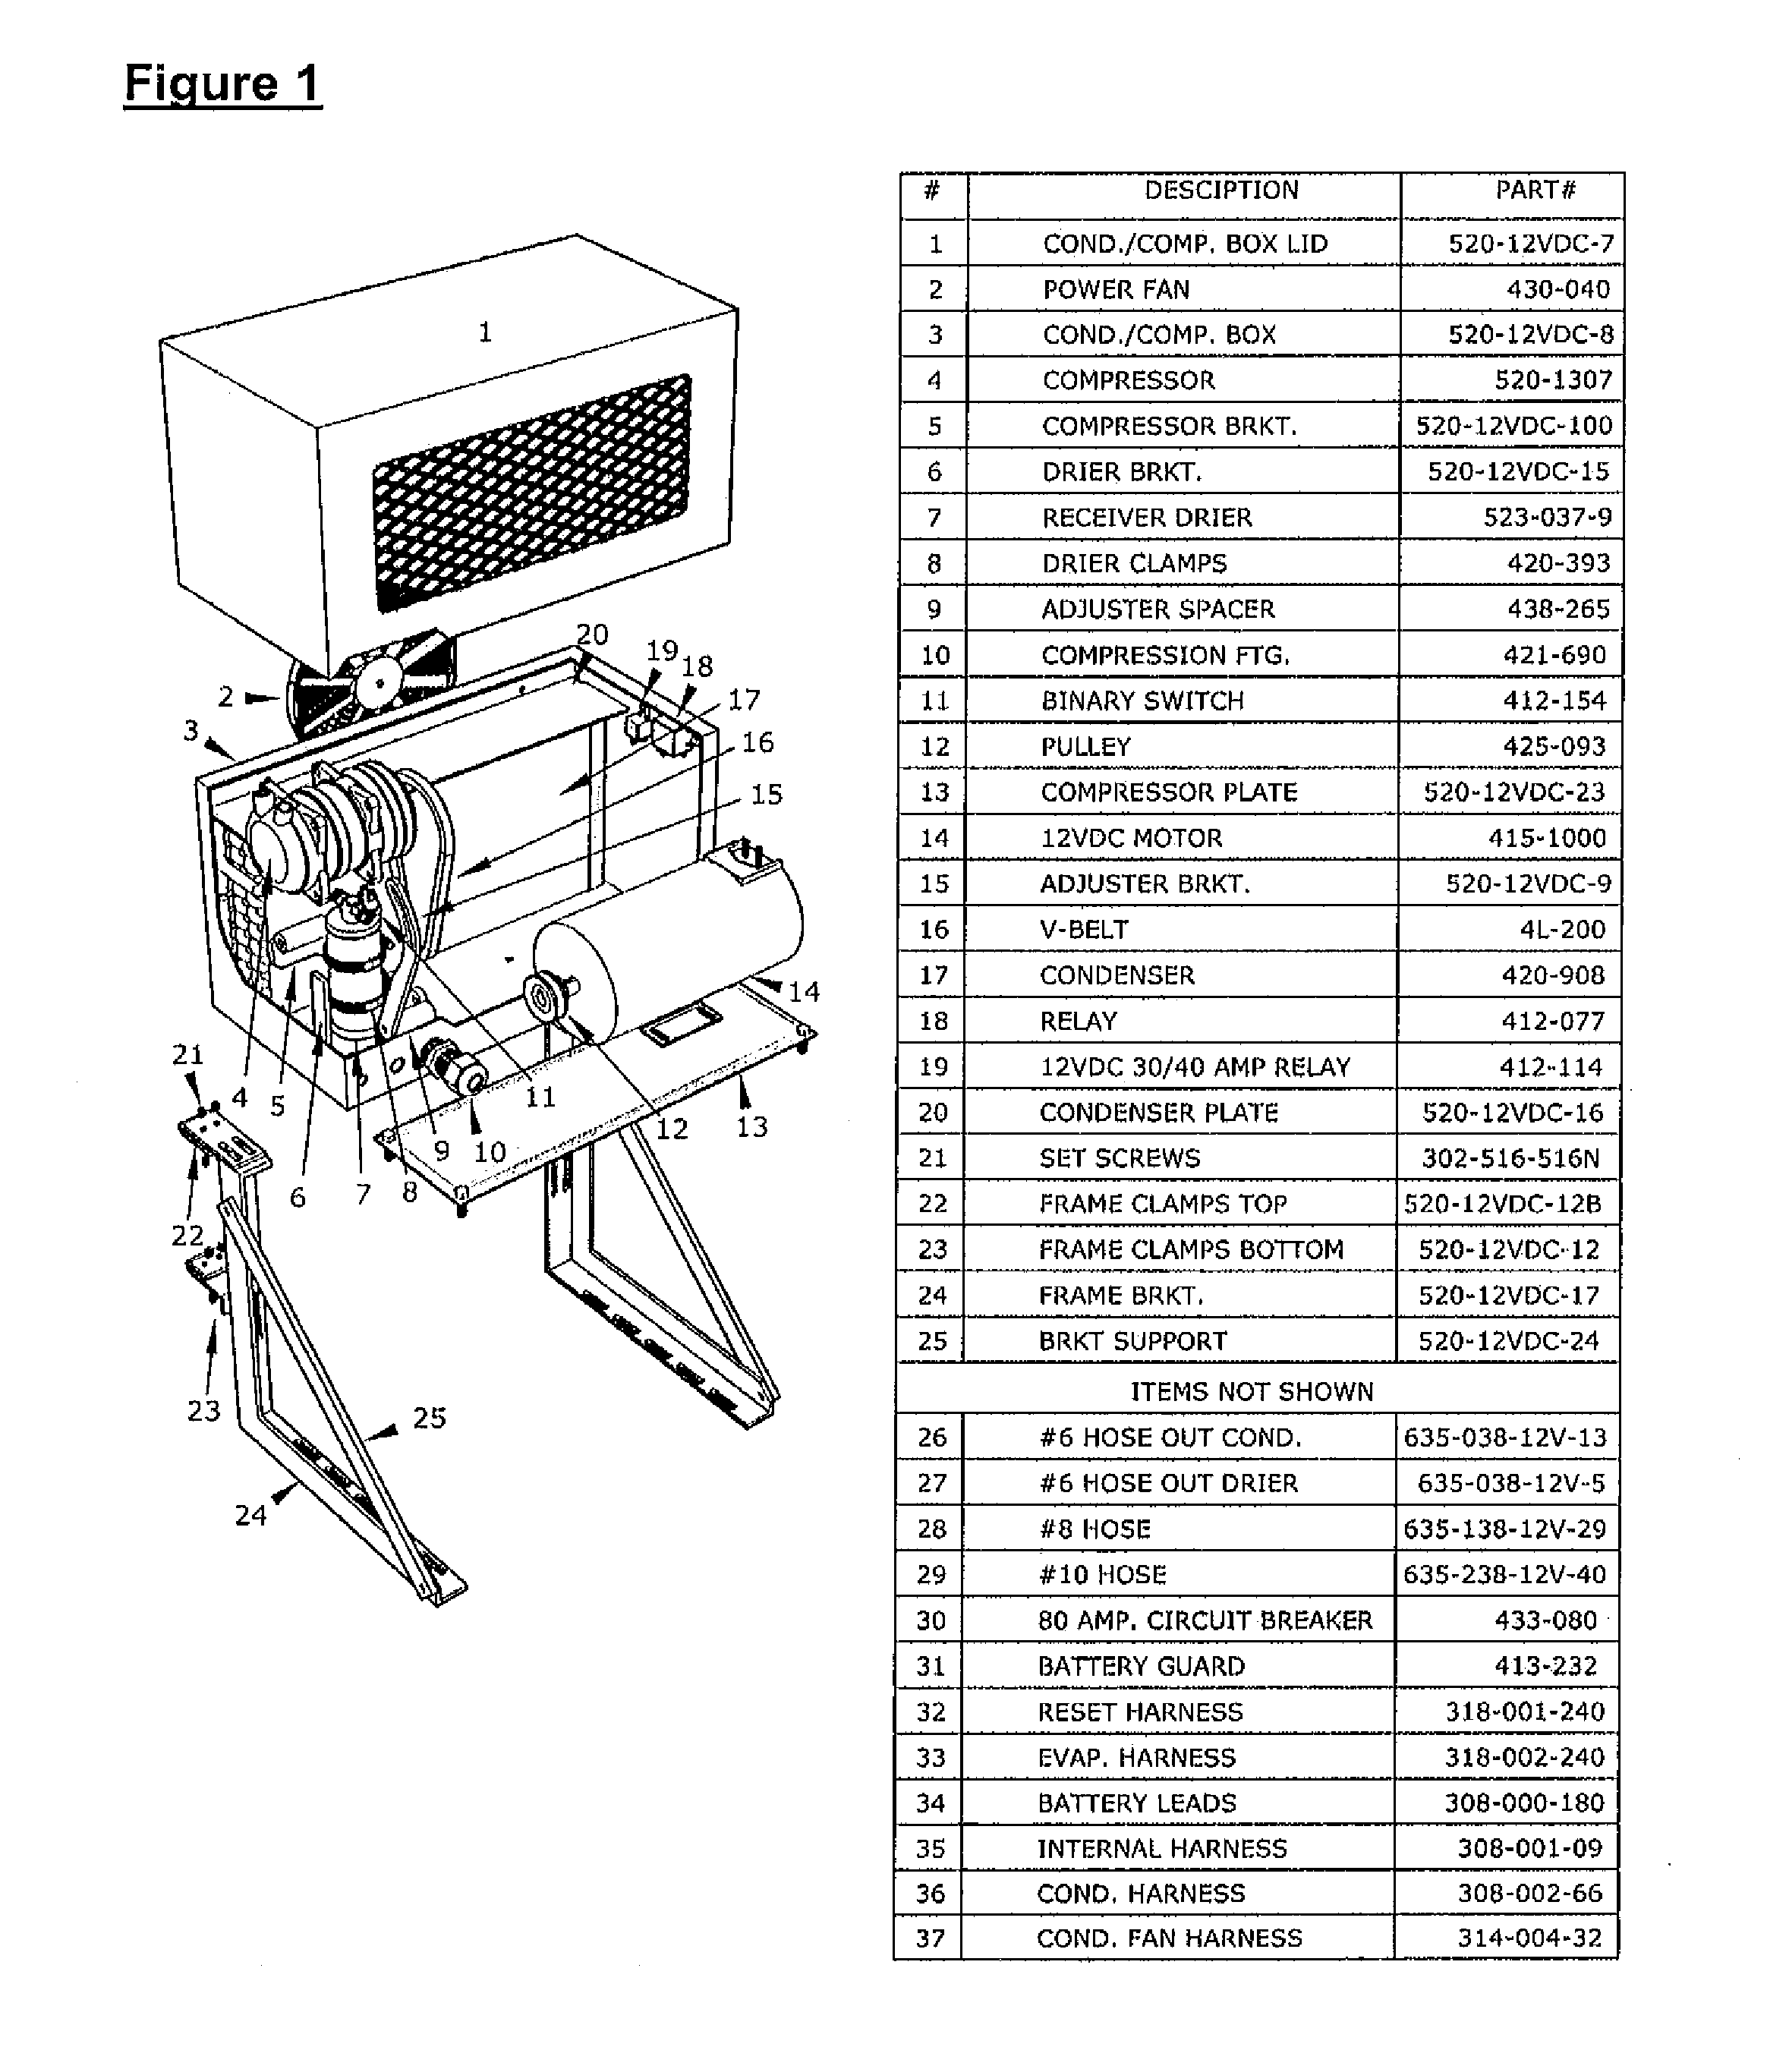 Truck Air Conditioner for Keeping Cabin Temperature Comfortable Independently of the Vehicle Engine